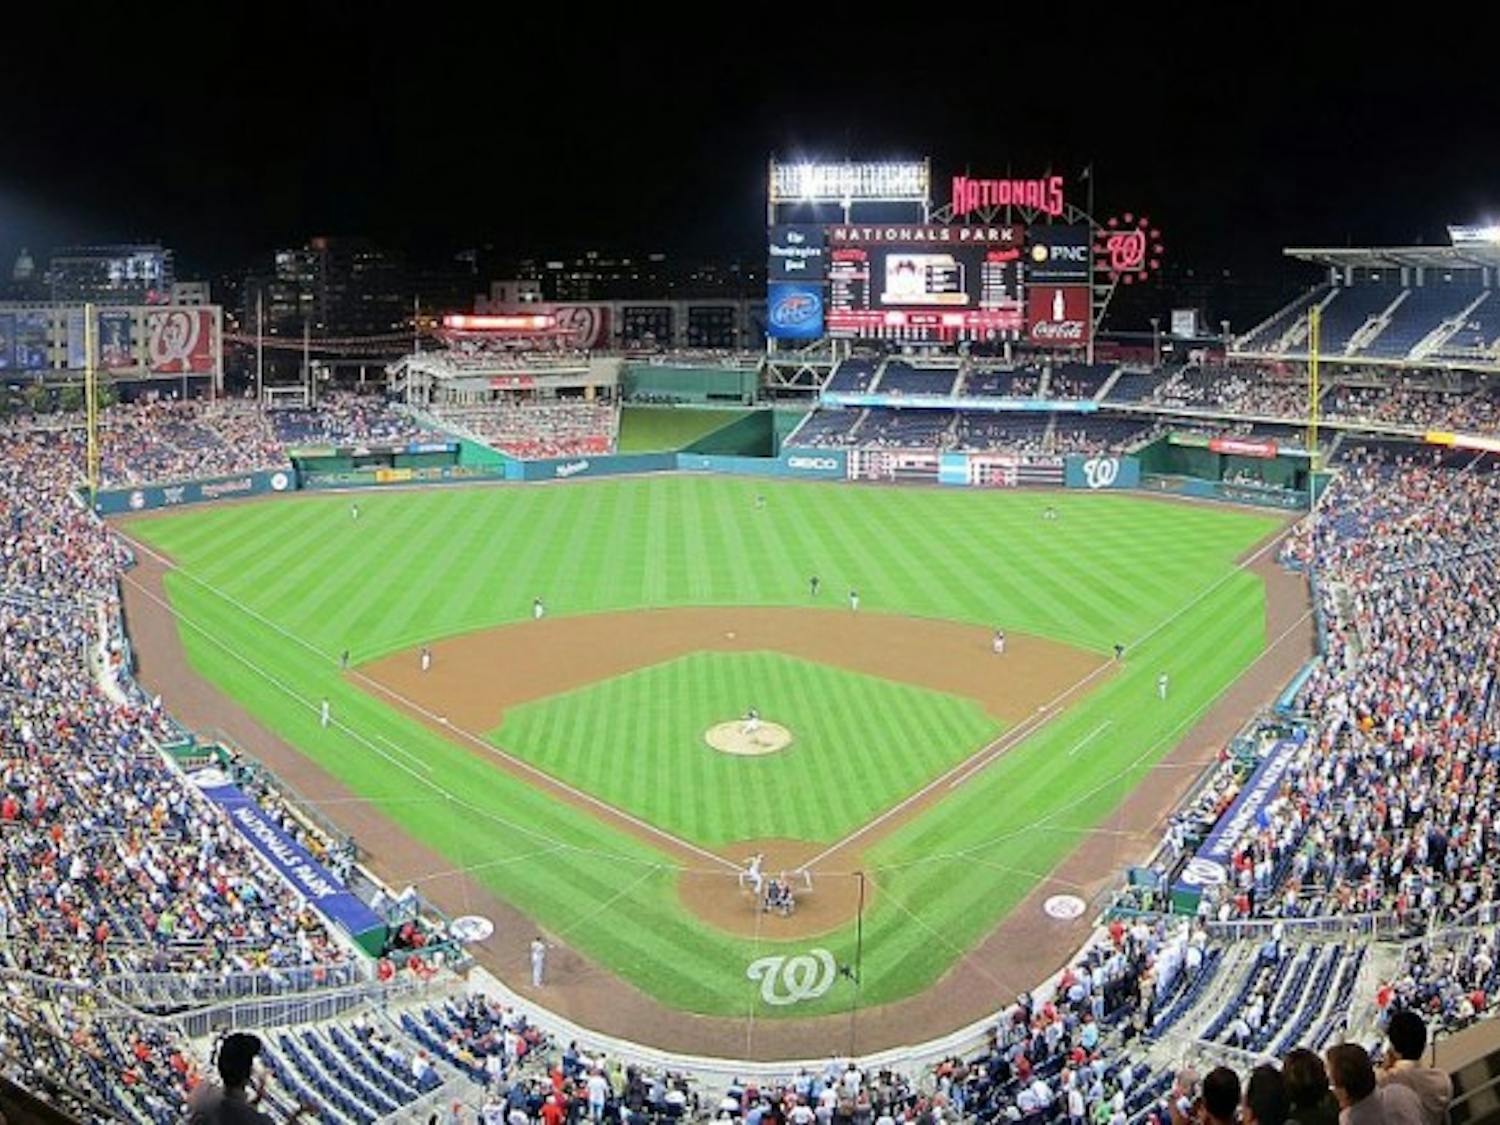 Catch the Nats game this Friday at Nationals Park to start the weekend off right.